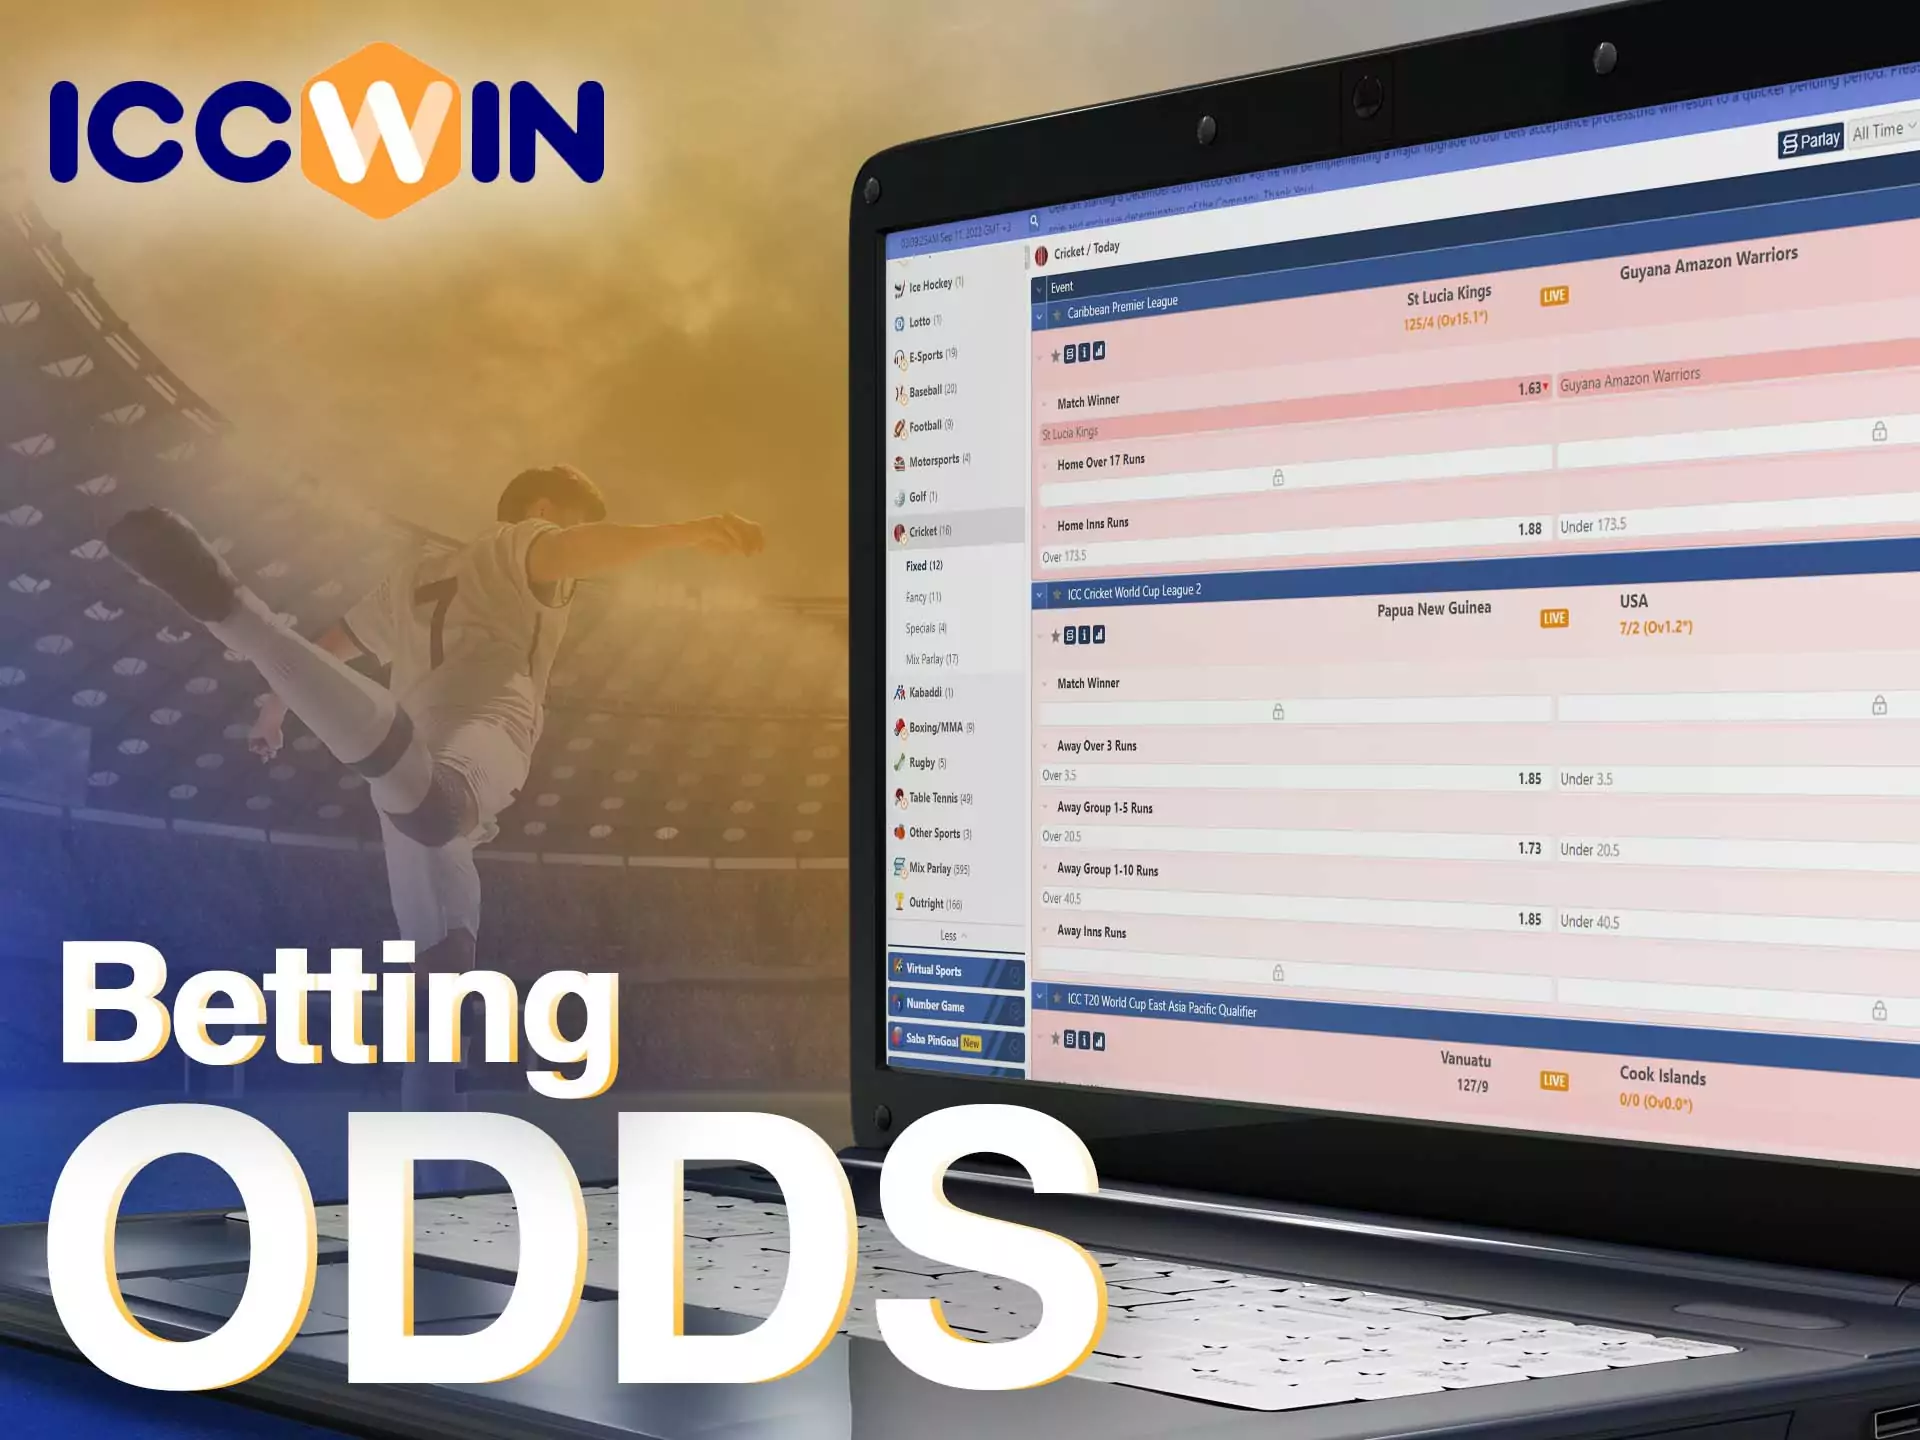 On the ICCWin website, the odds are high and quite competitive with the betting market.